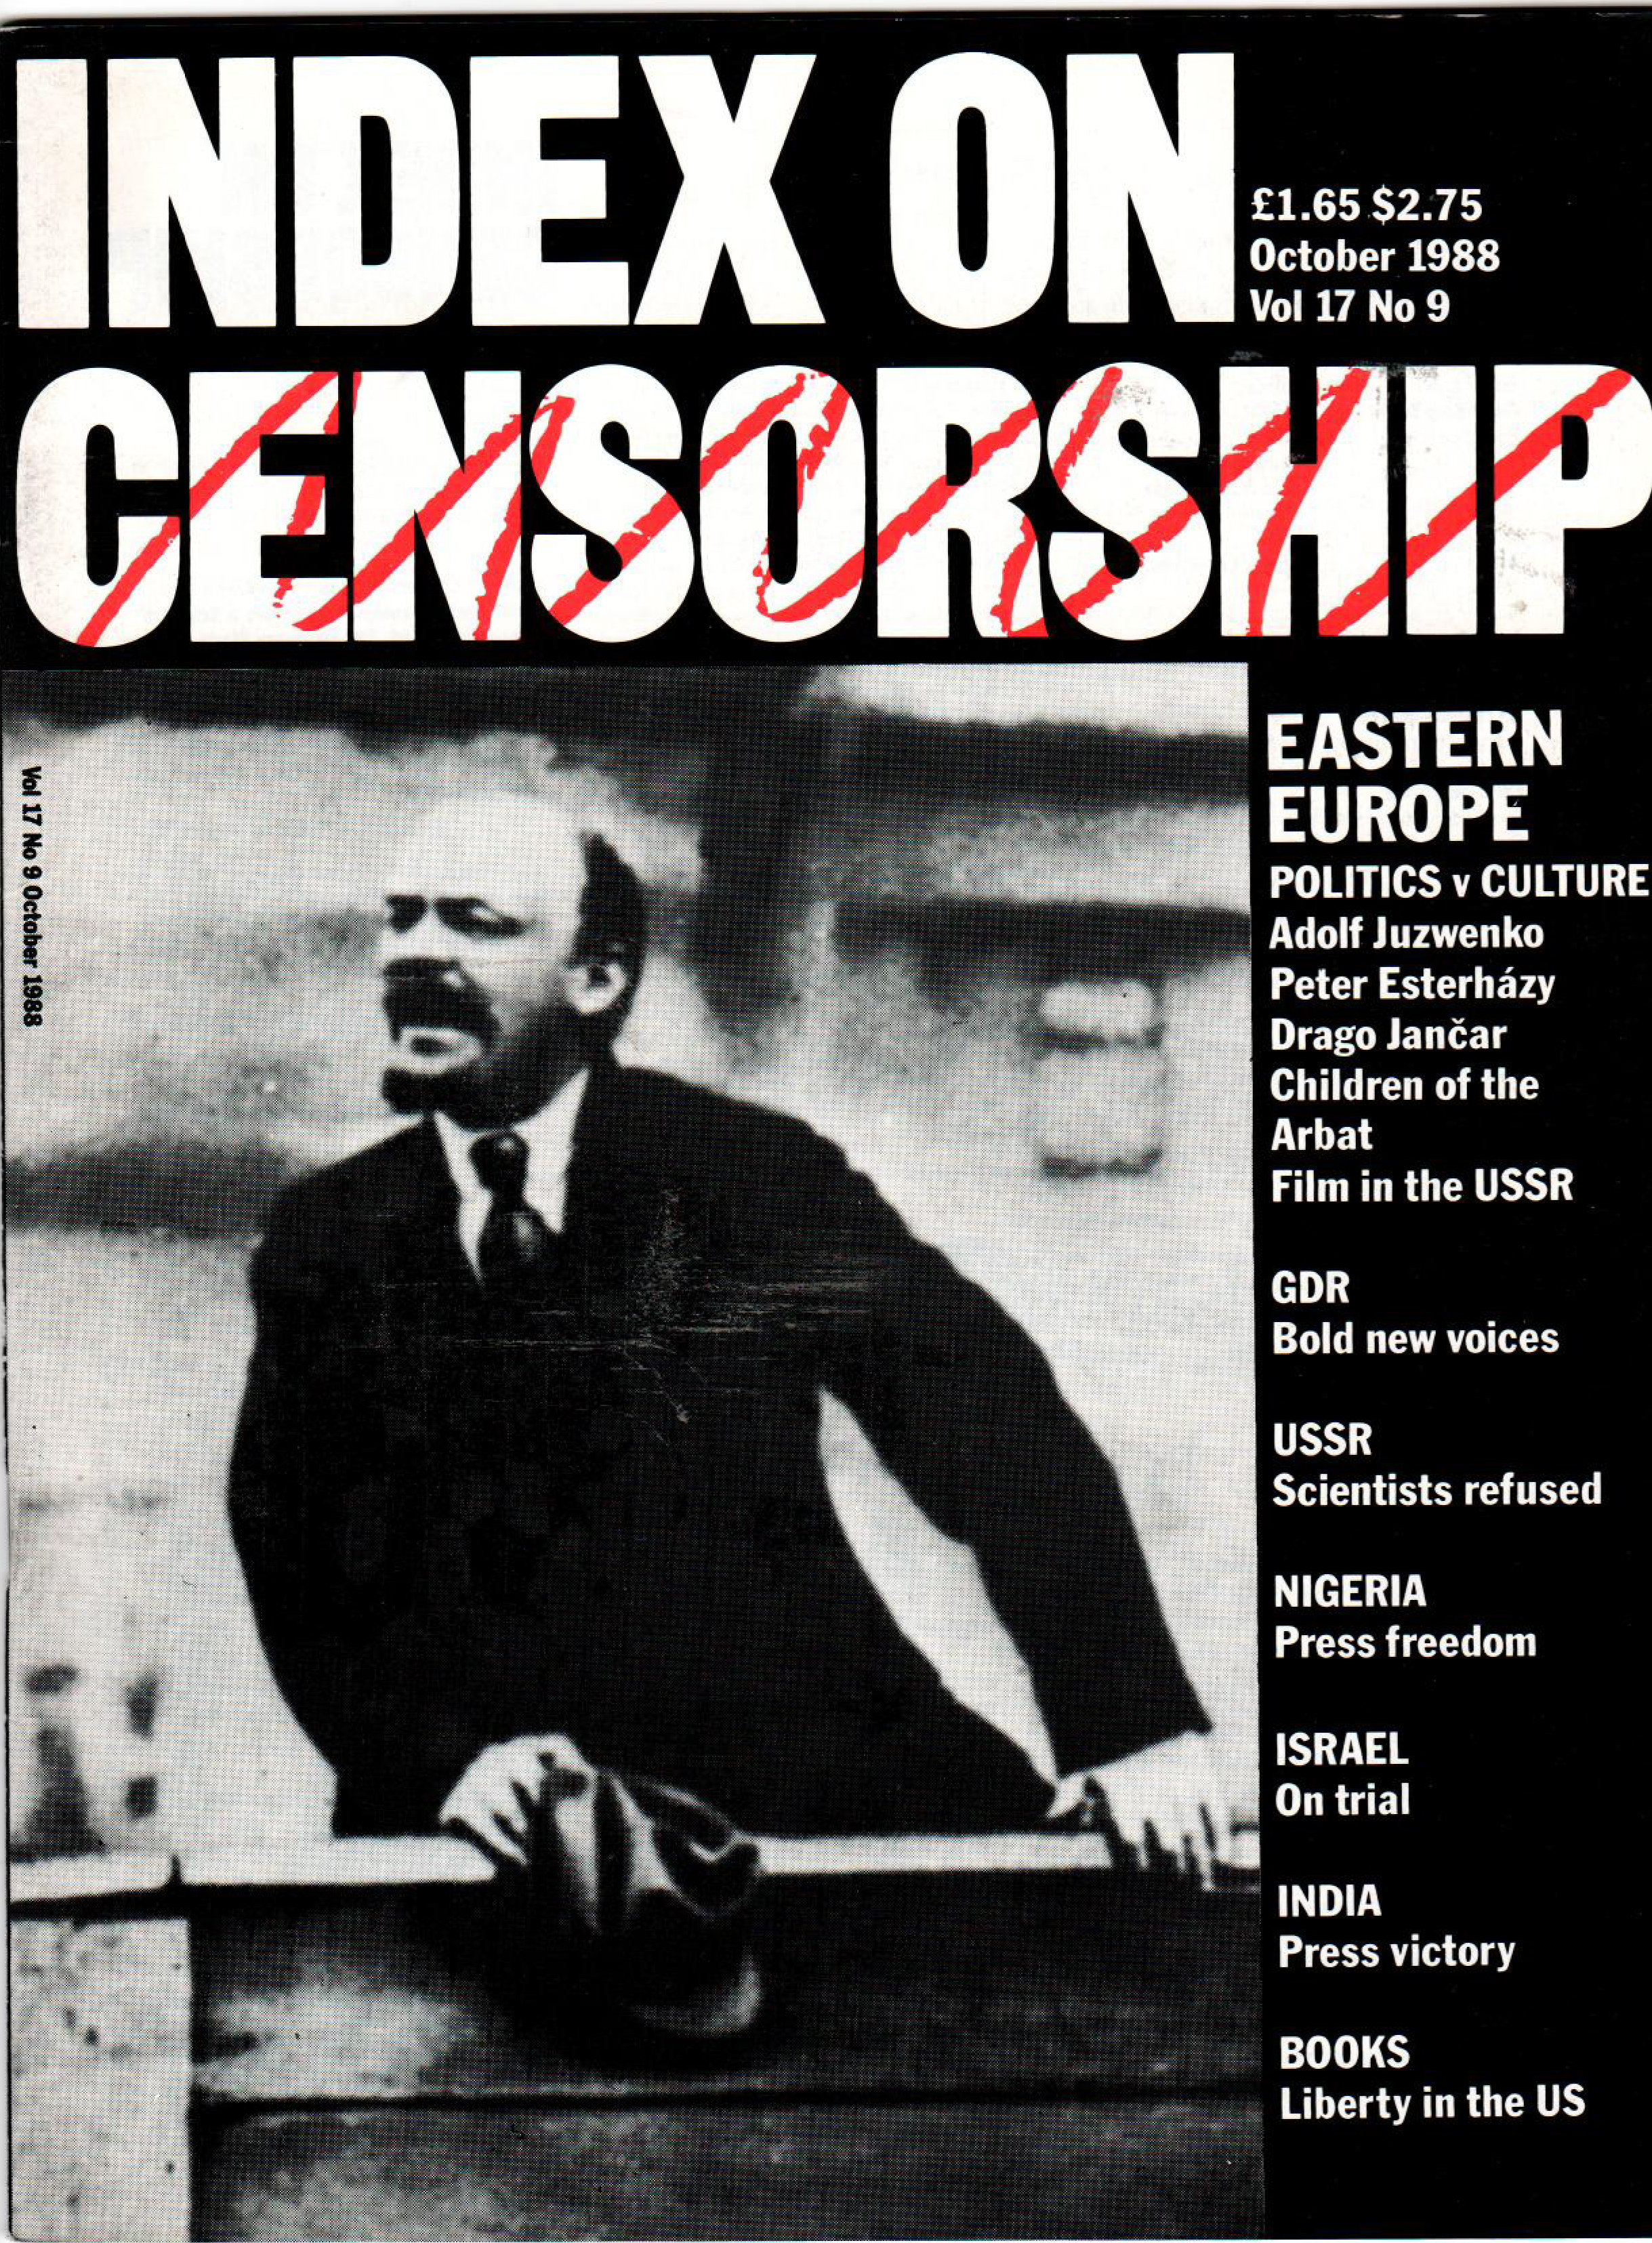 Eastern Europe: Politics v Culture, the October 1988 issue of Index on Censorship magazine.